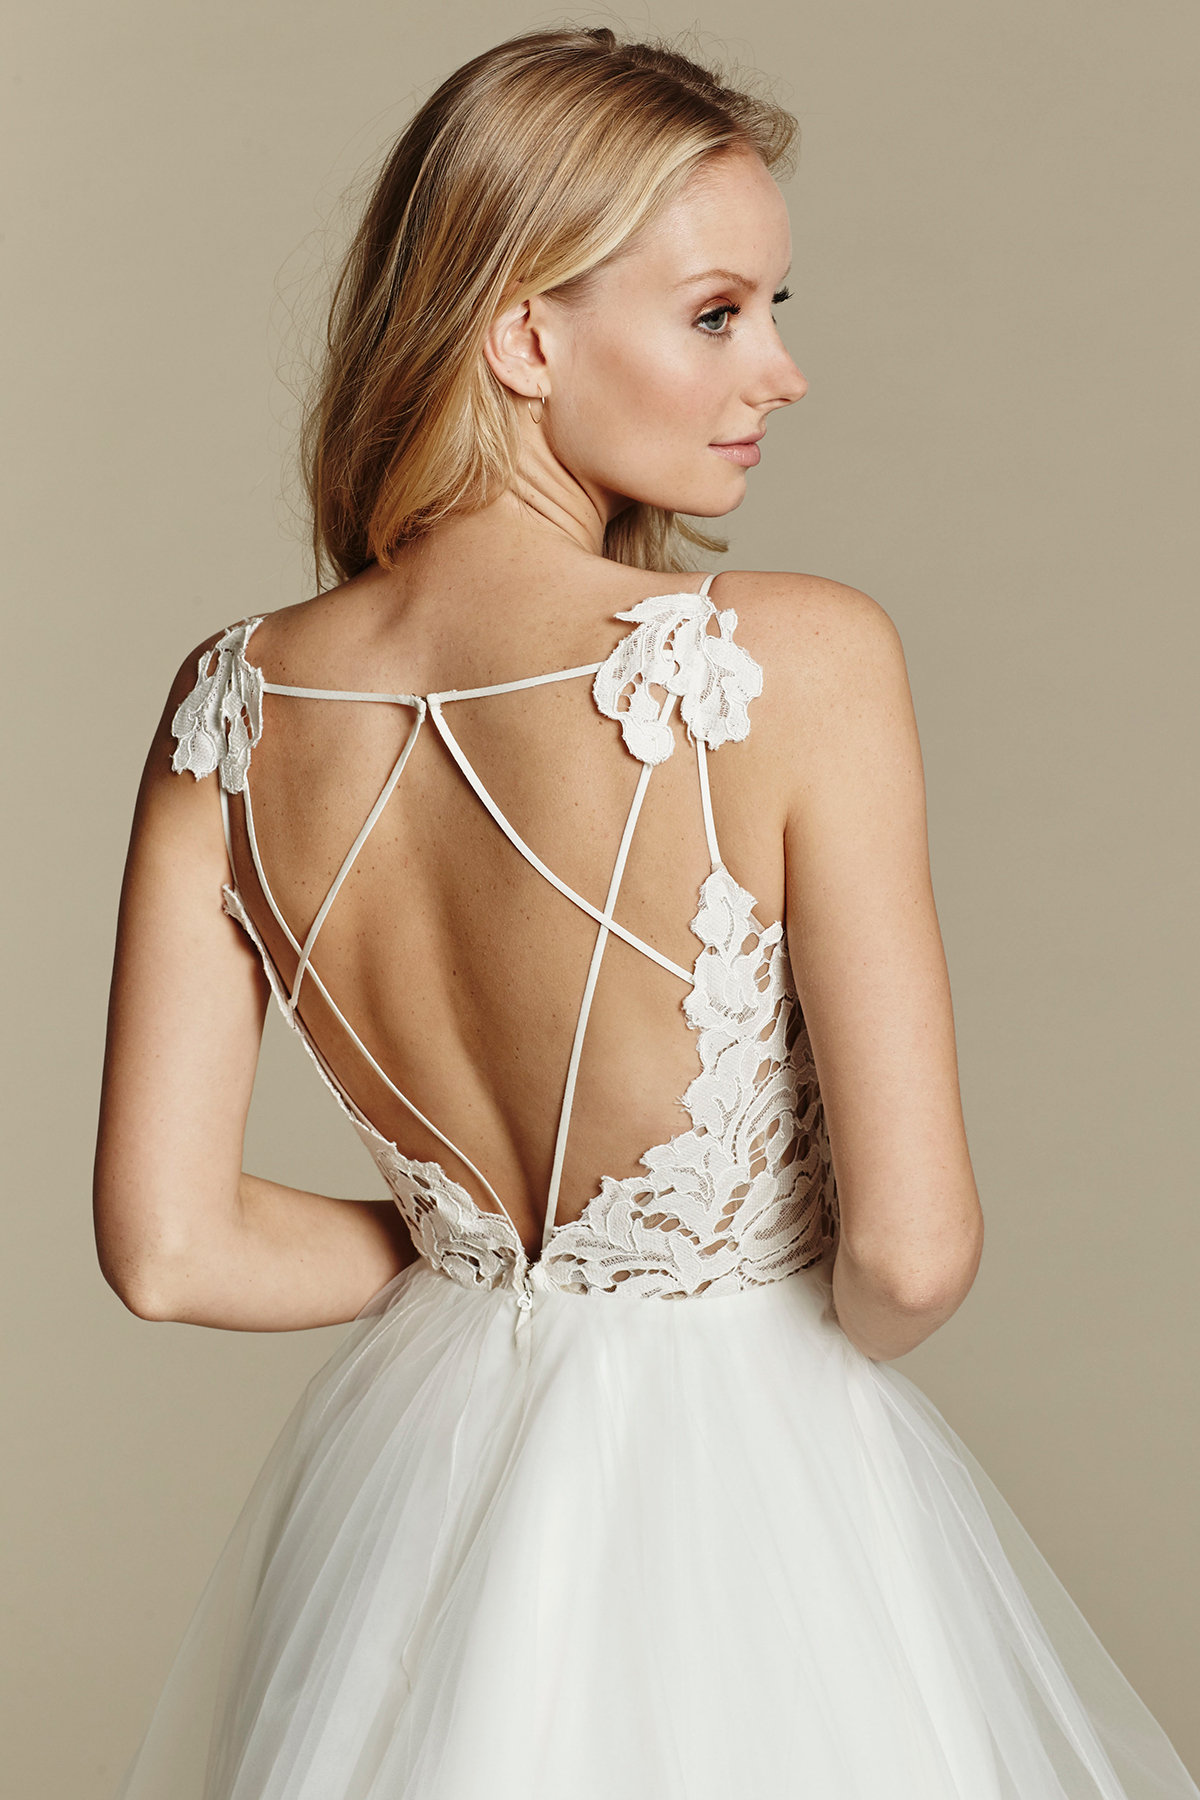 blush-hayley-paige-bridal-lace-tulle-ball-gown-scalloped-v-neck-strap-tiered-tulle-horsehair-trim-1600_x3.jpg